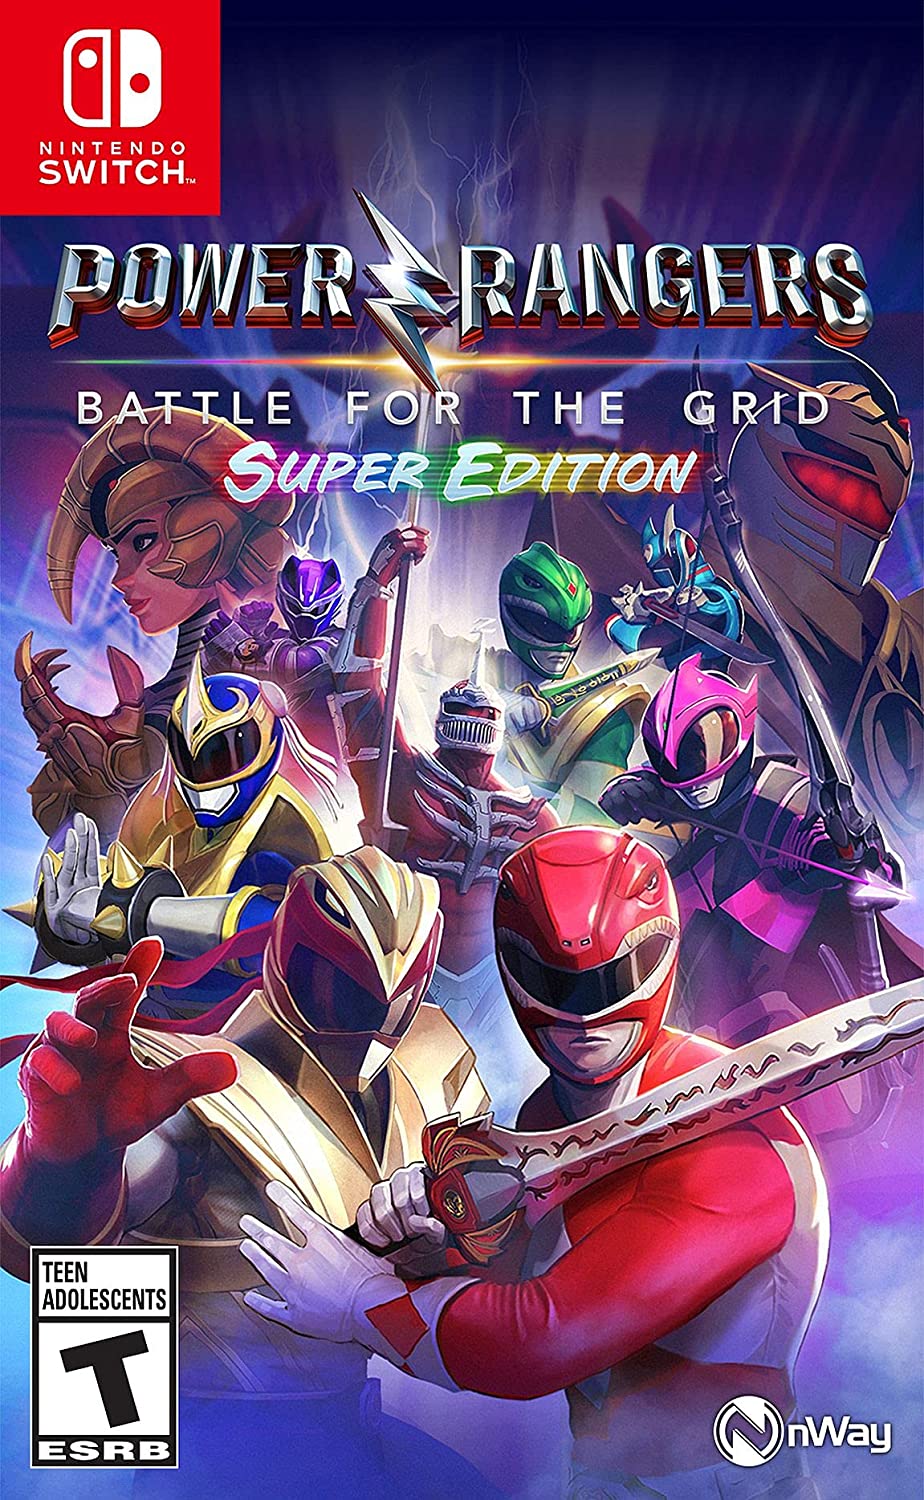 POWER RANGERS BATTLE FOR THE GRID SUPER EDITION